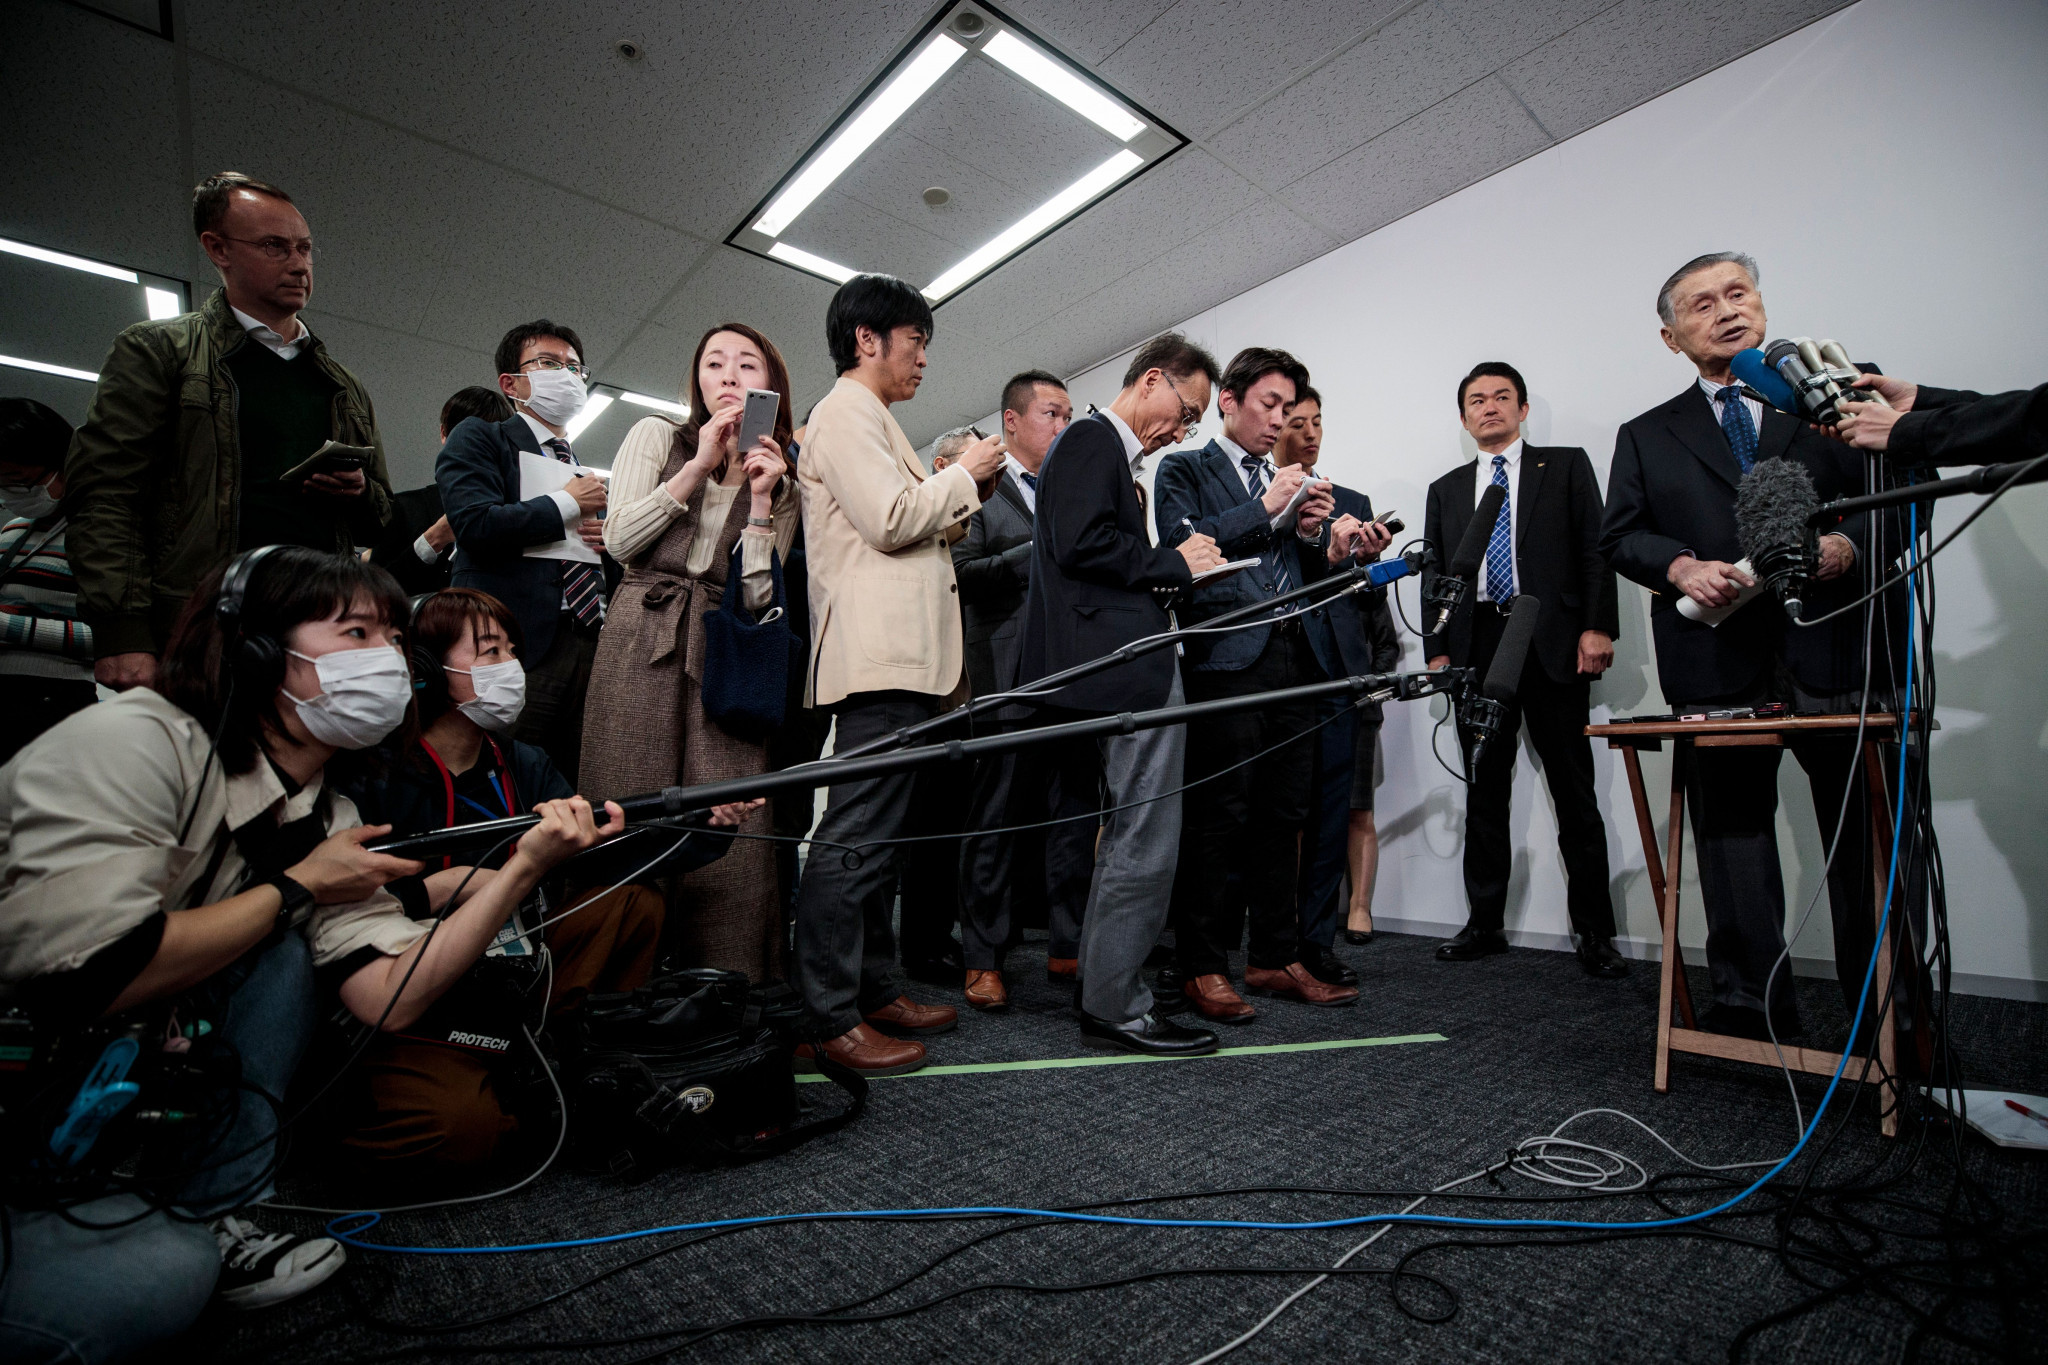 Tokyo 2020 President quick to quash speculation Olympics could be postponed